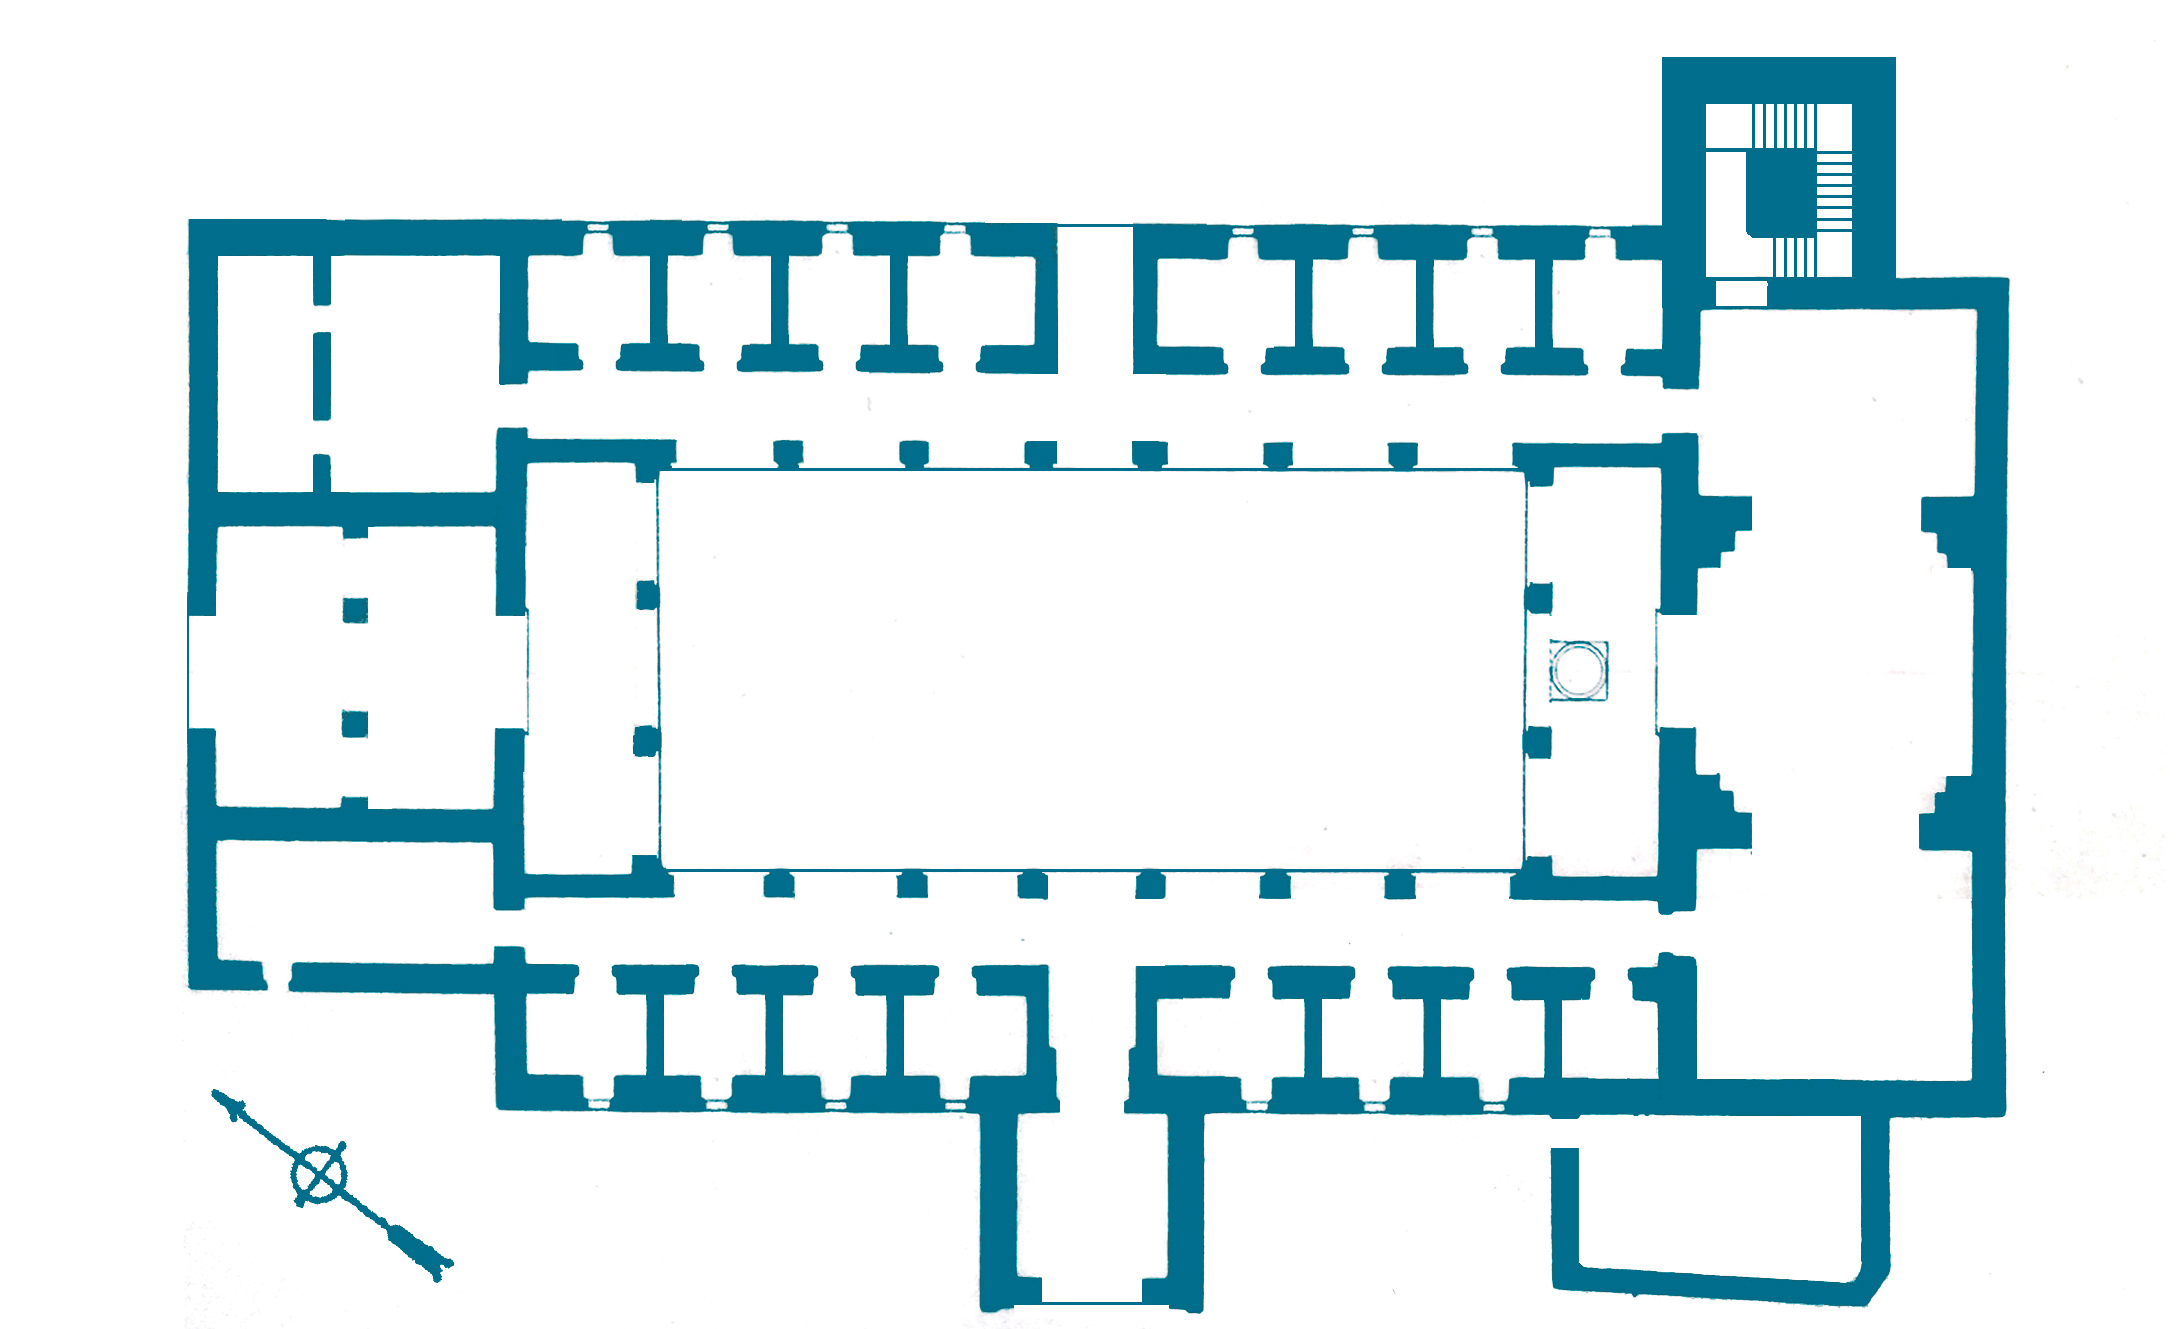 Reconstruction of the plan of the madrasa during the Middle Ages